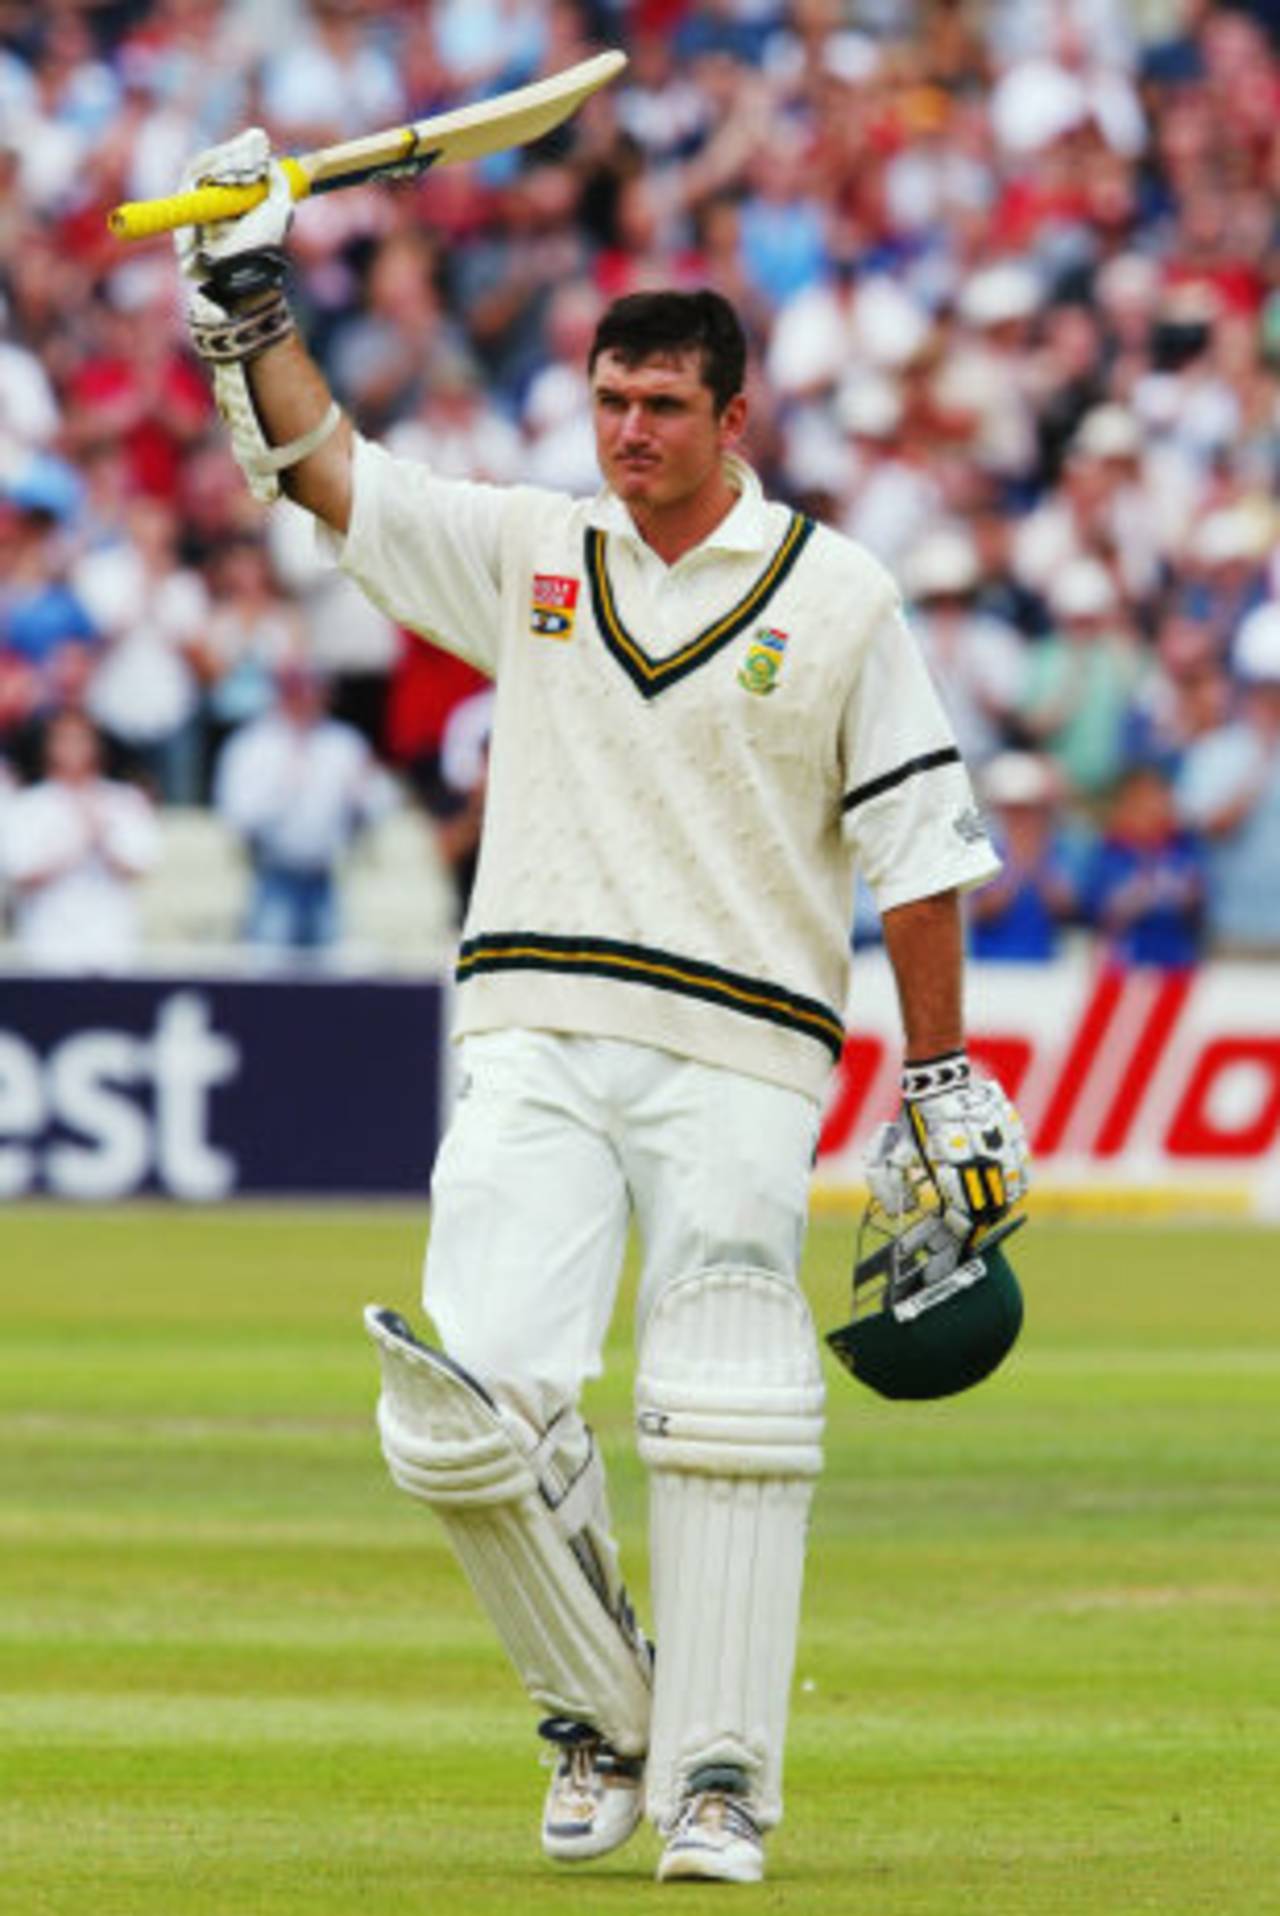 Graeme Smith acknowledges the crowd after his dismissal for 277, day three, England v South Africa, first Test, Birmingham, July 26, 2003